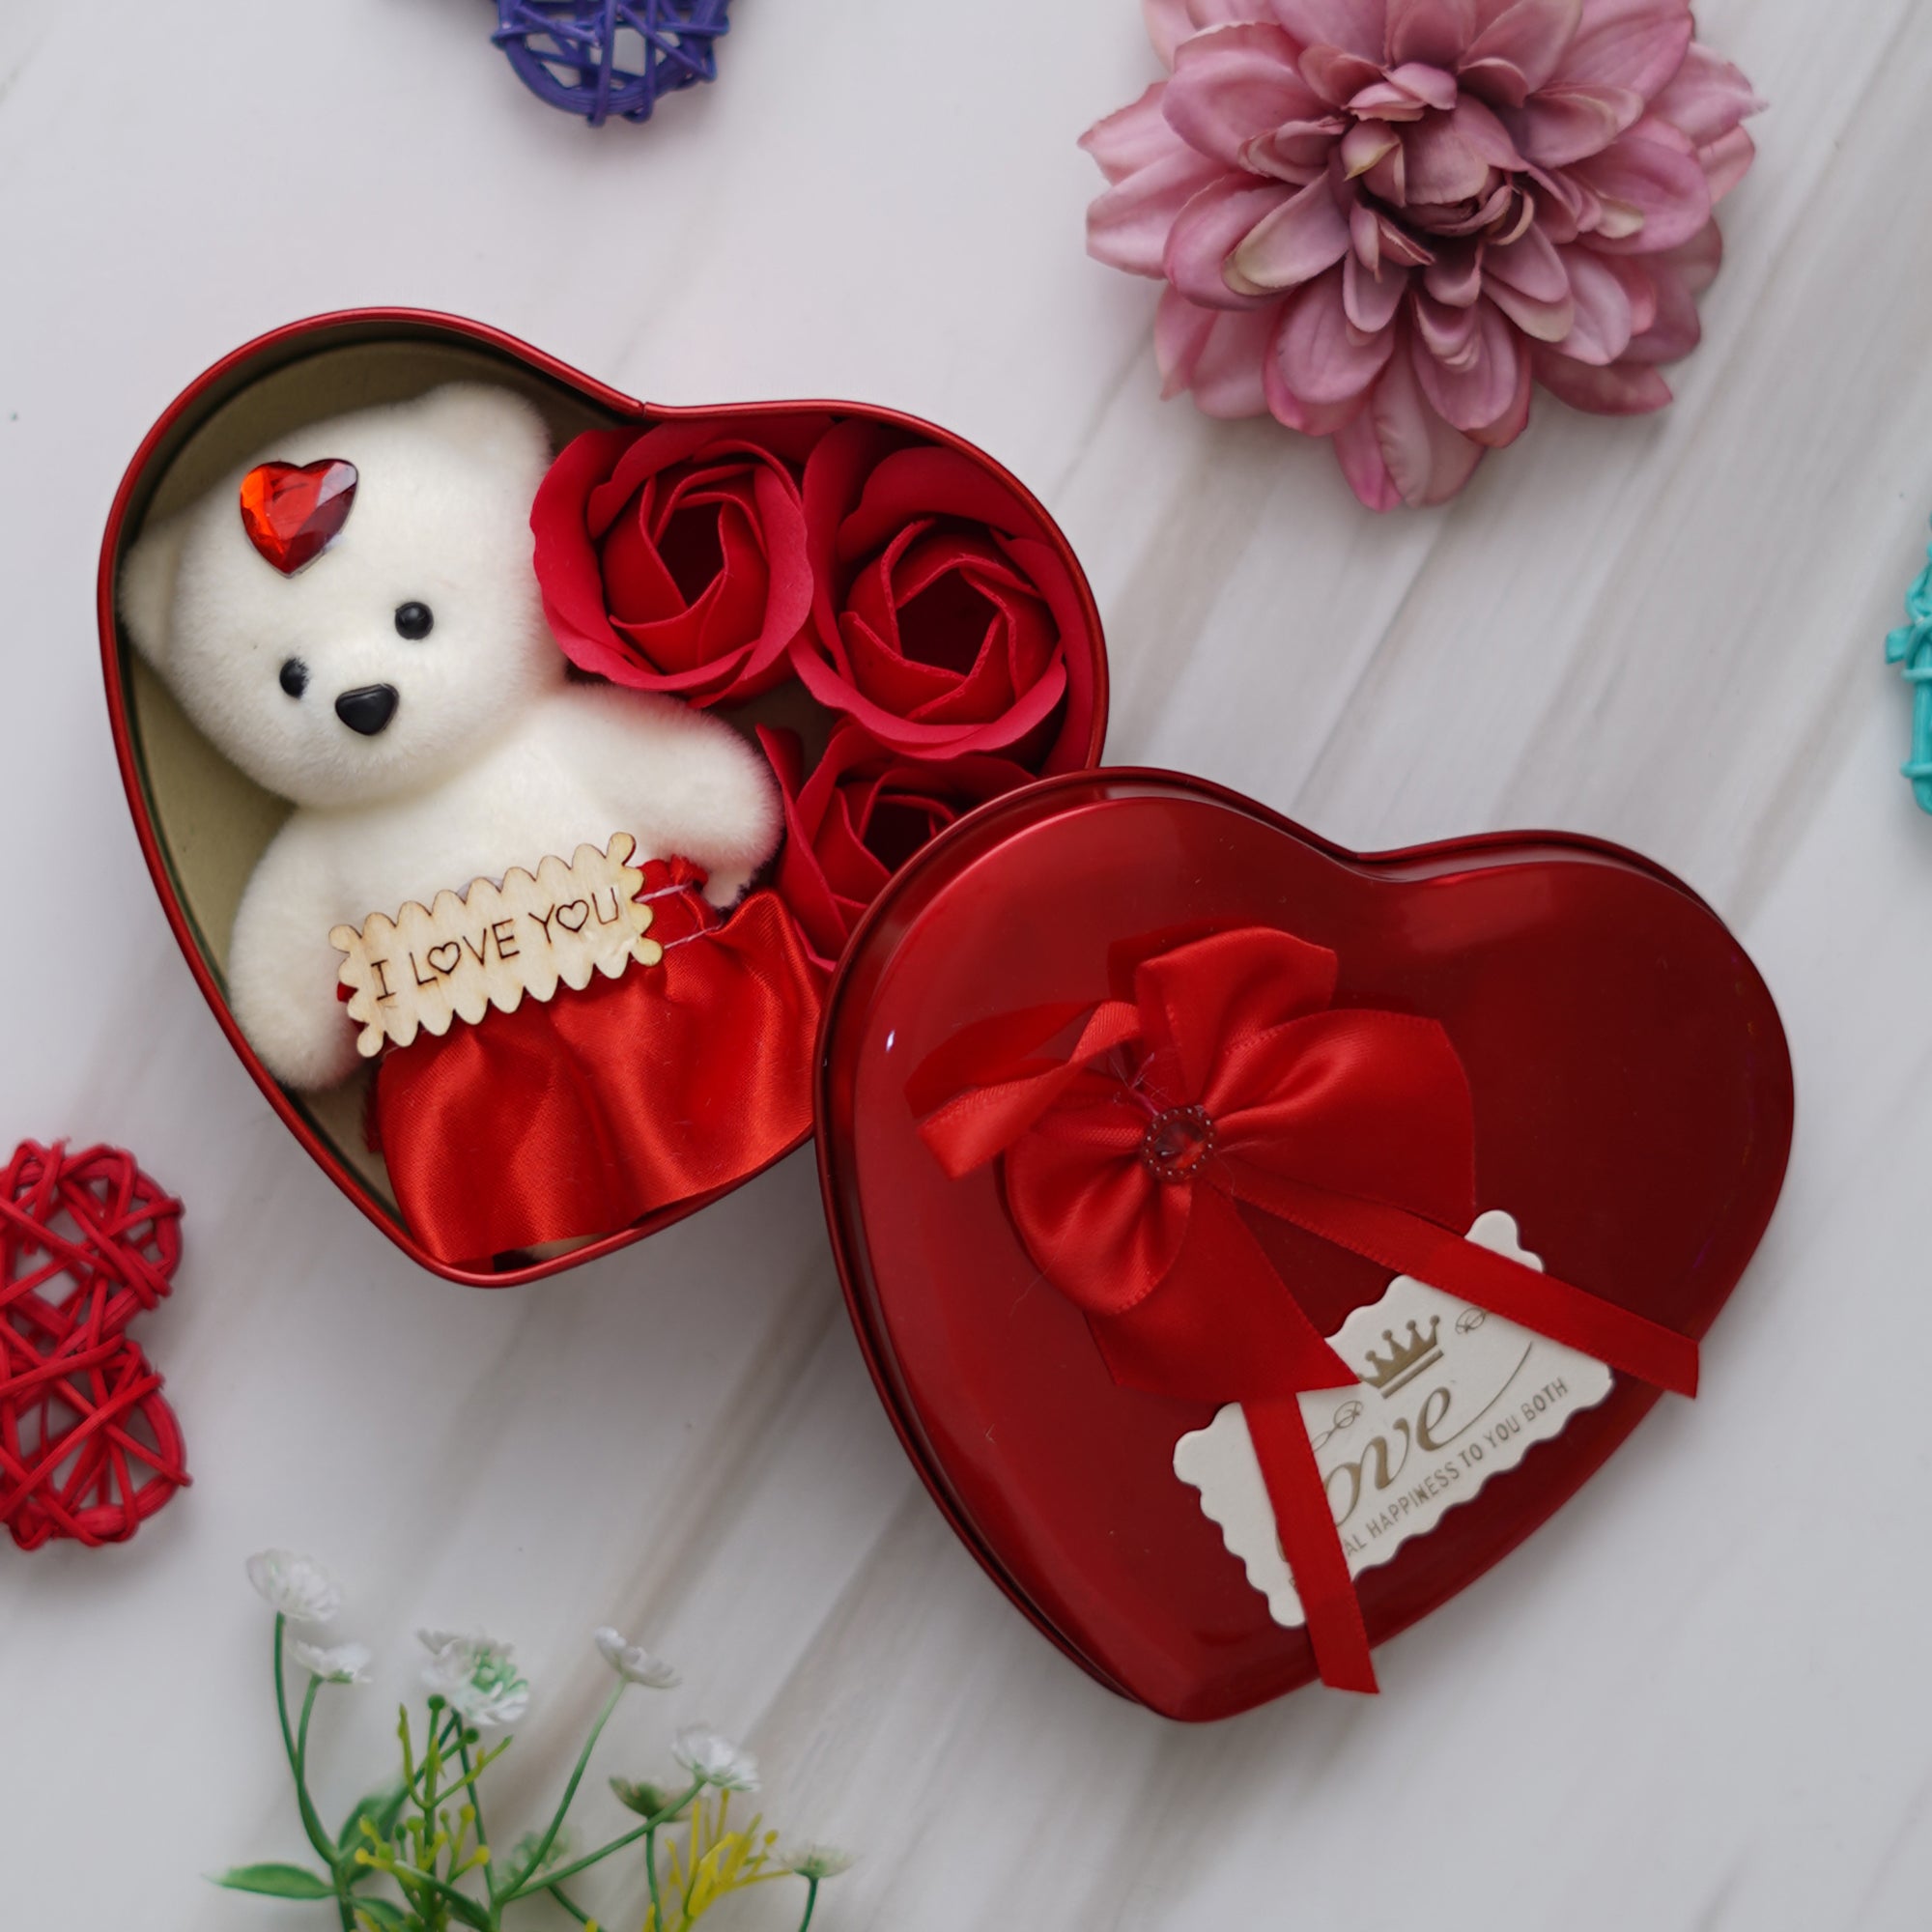 Valentine Combo of Card, Heart Shaped Gift Box Set with White Teddy and Red Roses, "20 Reasons Why I Love You" Printed on Little Red Hearts Decorative Wooden Gift Set Box 3